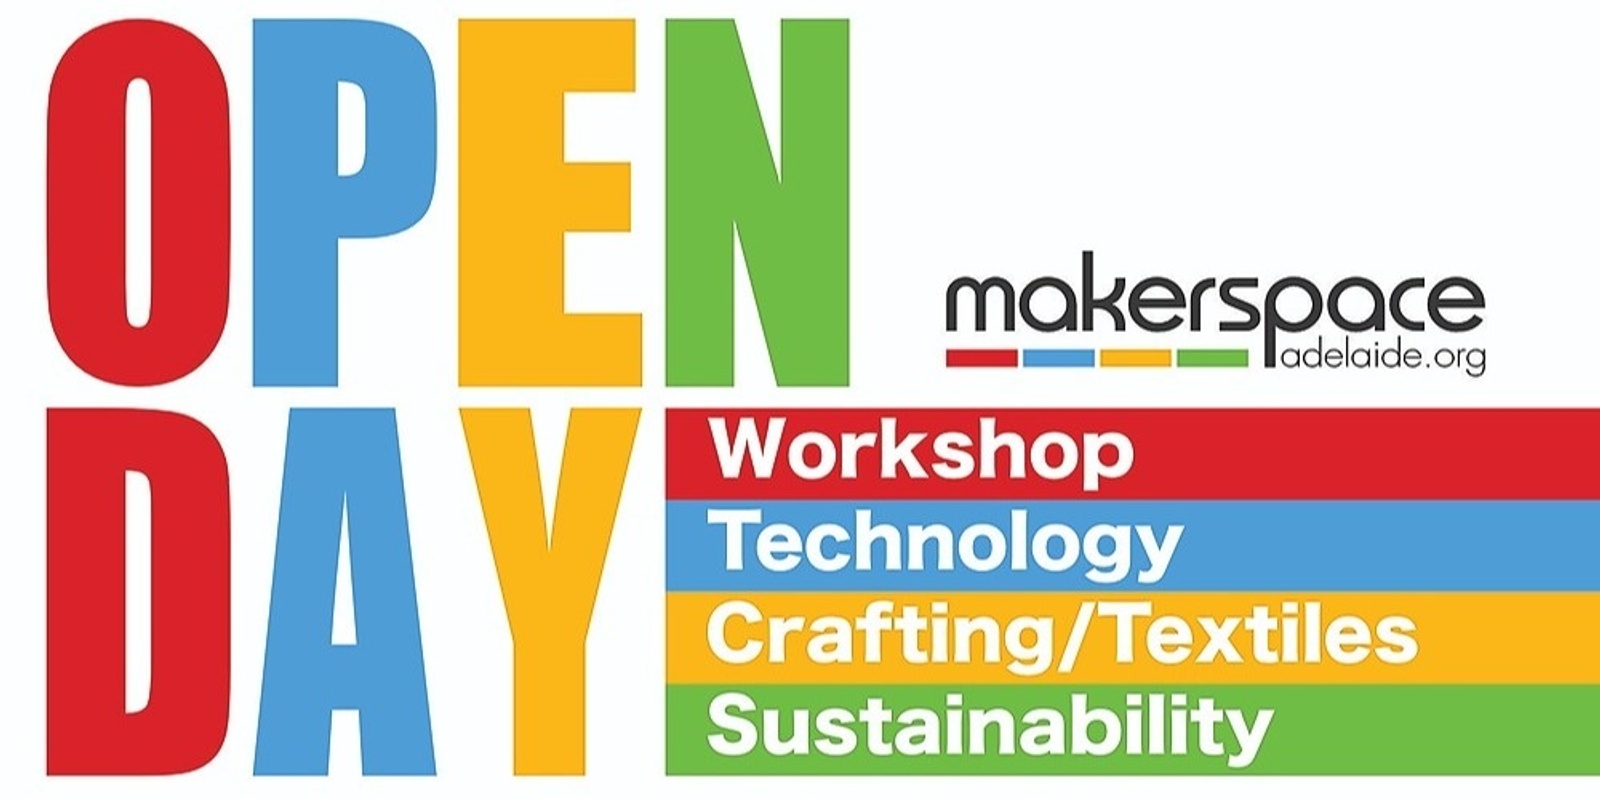 Open Day - Makerspace Adelaide Re-launch